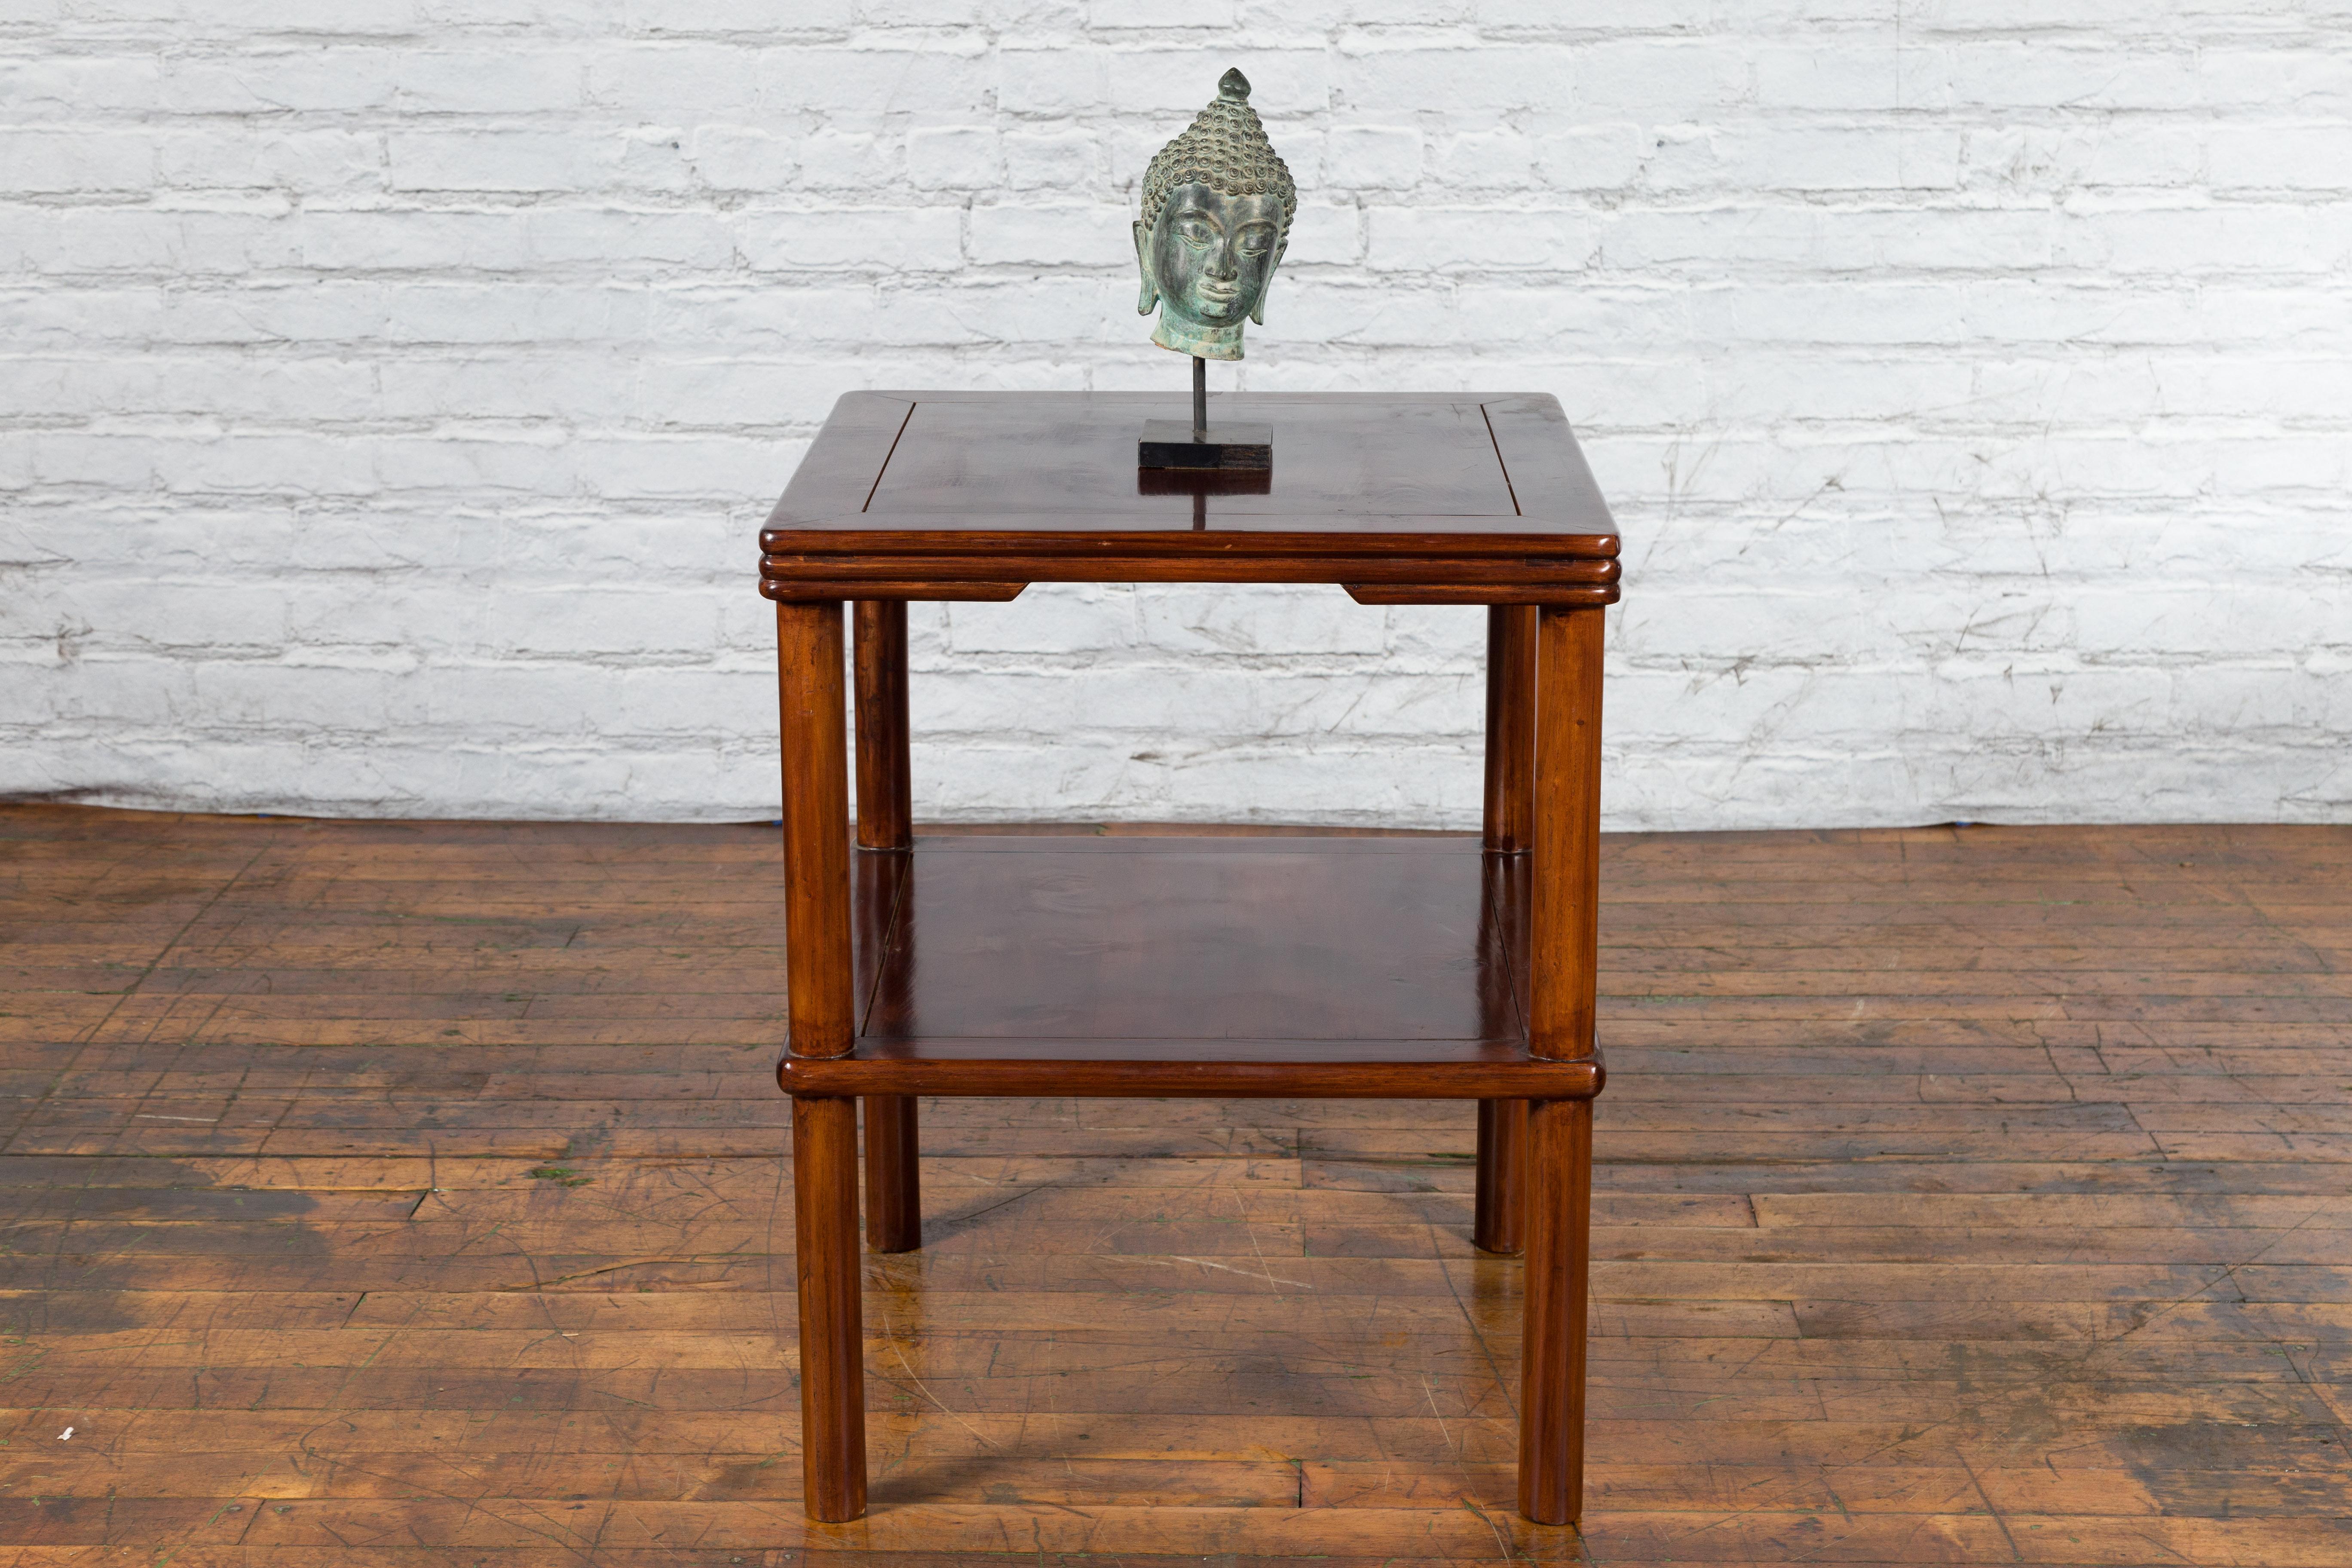 Chinese Brown Lacquered 19th Century Qing Dynasty Side Table with Reeded Apron